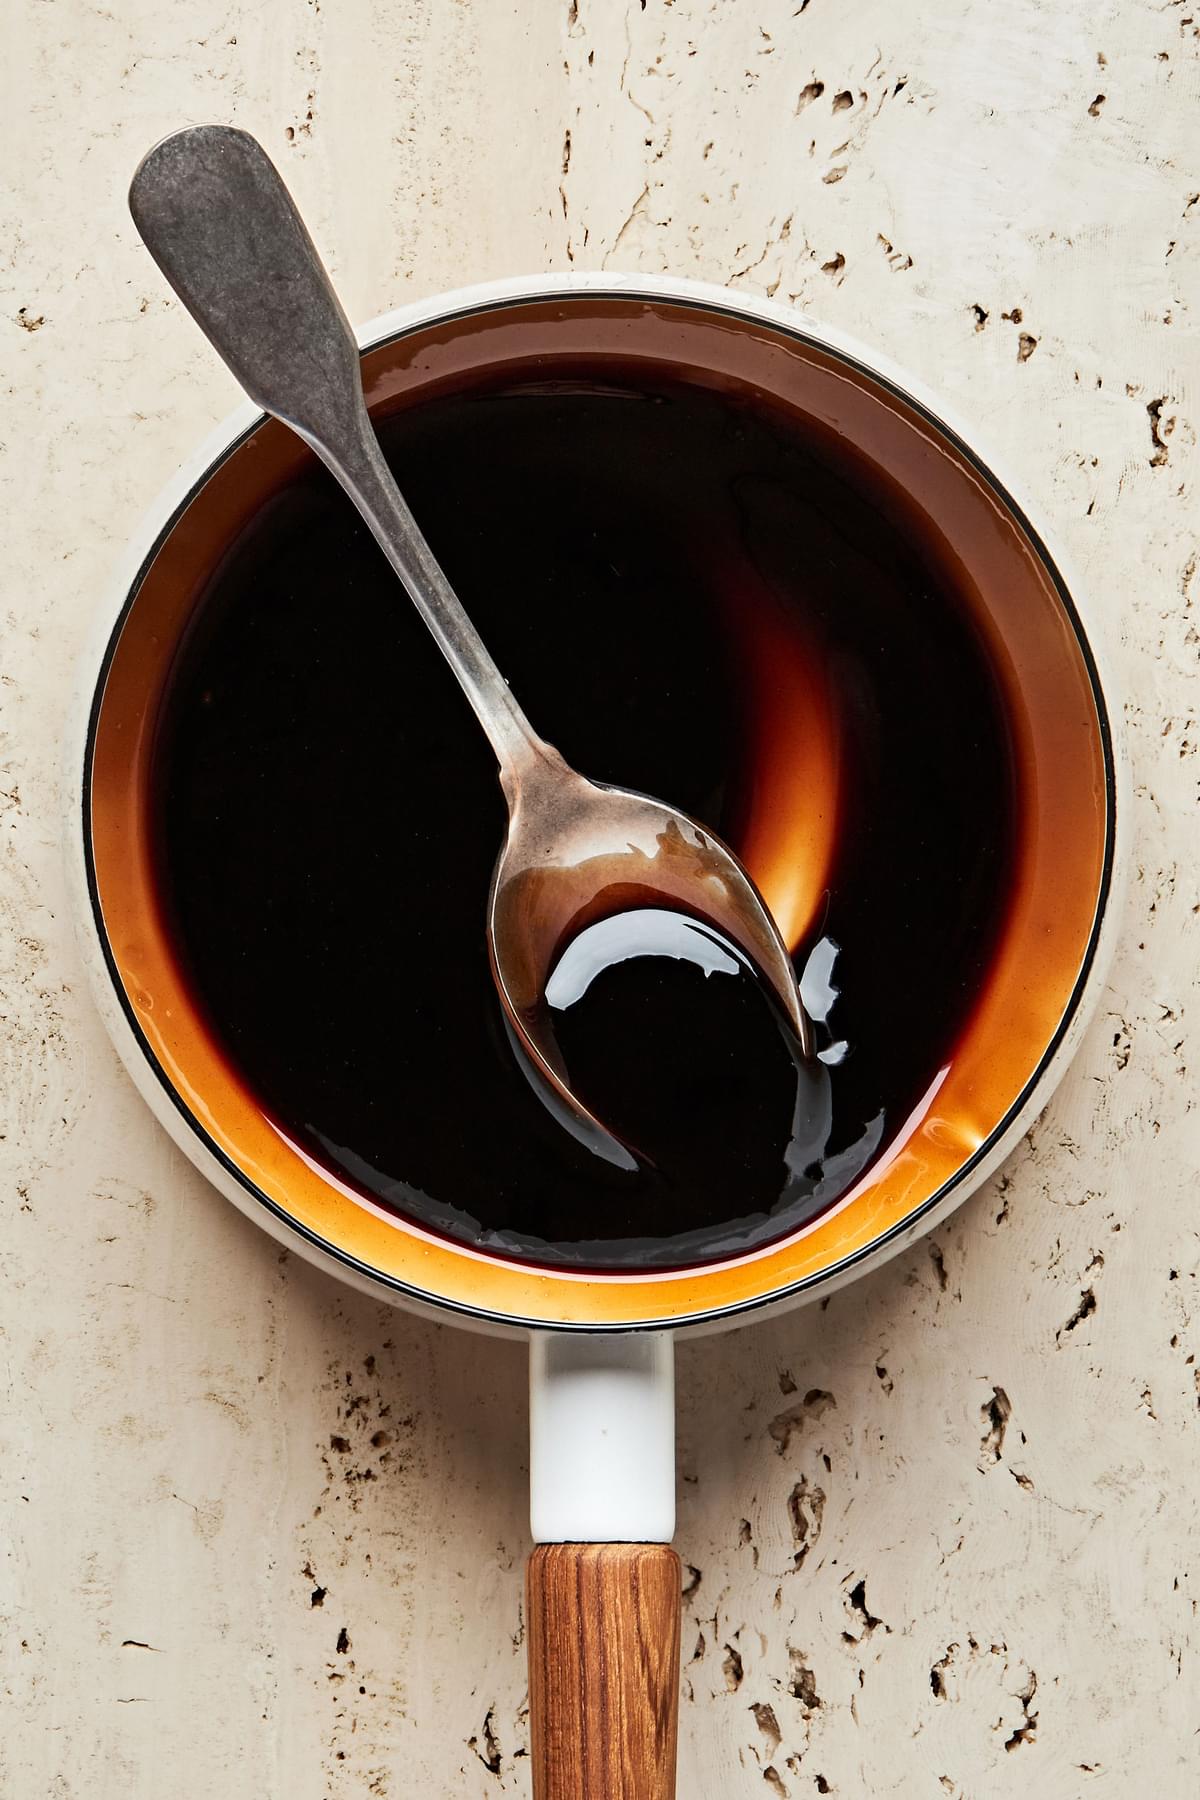 Balsamic reduction in a pot with a spoon. Made with balsamic vinegar, sugar, salt and cornstarch